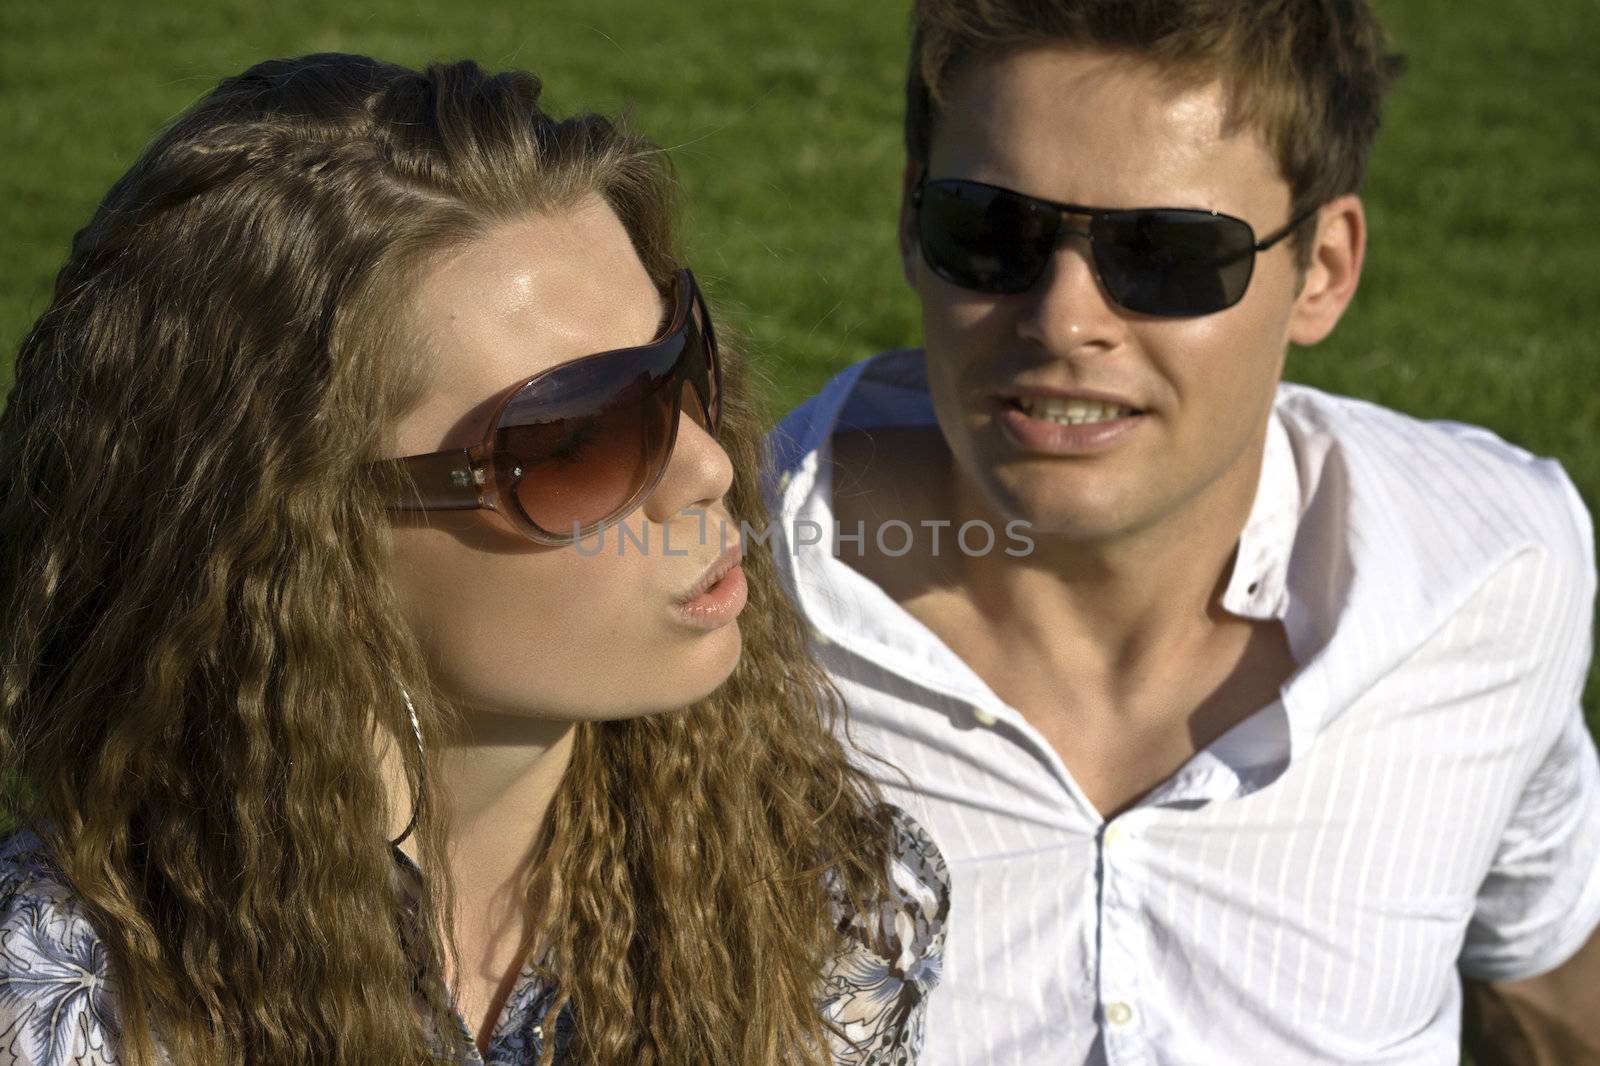 Closeup Of A Couple With Sunglasses by nfx702